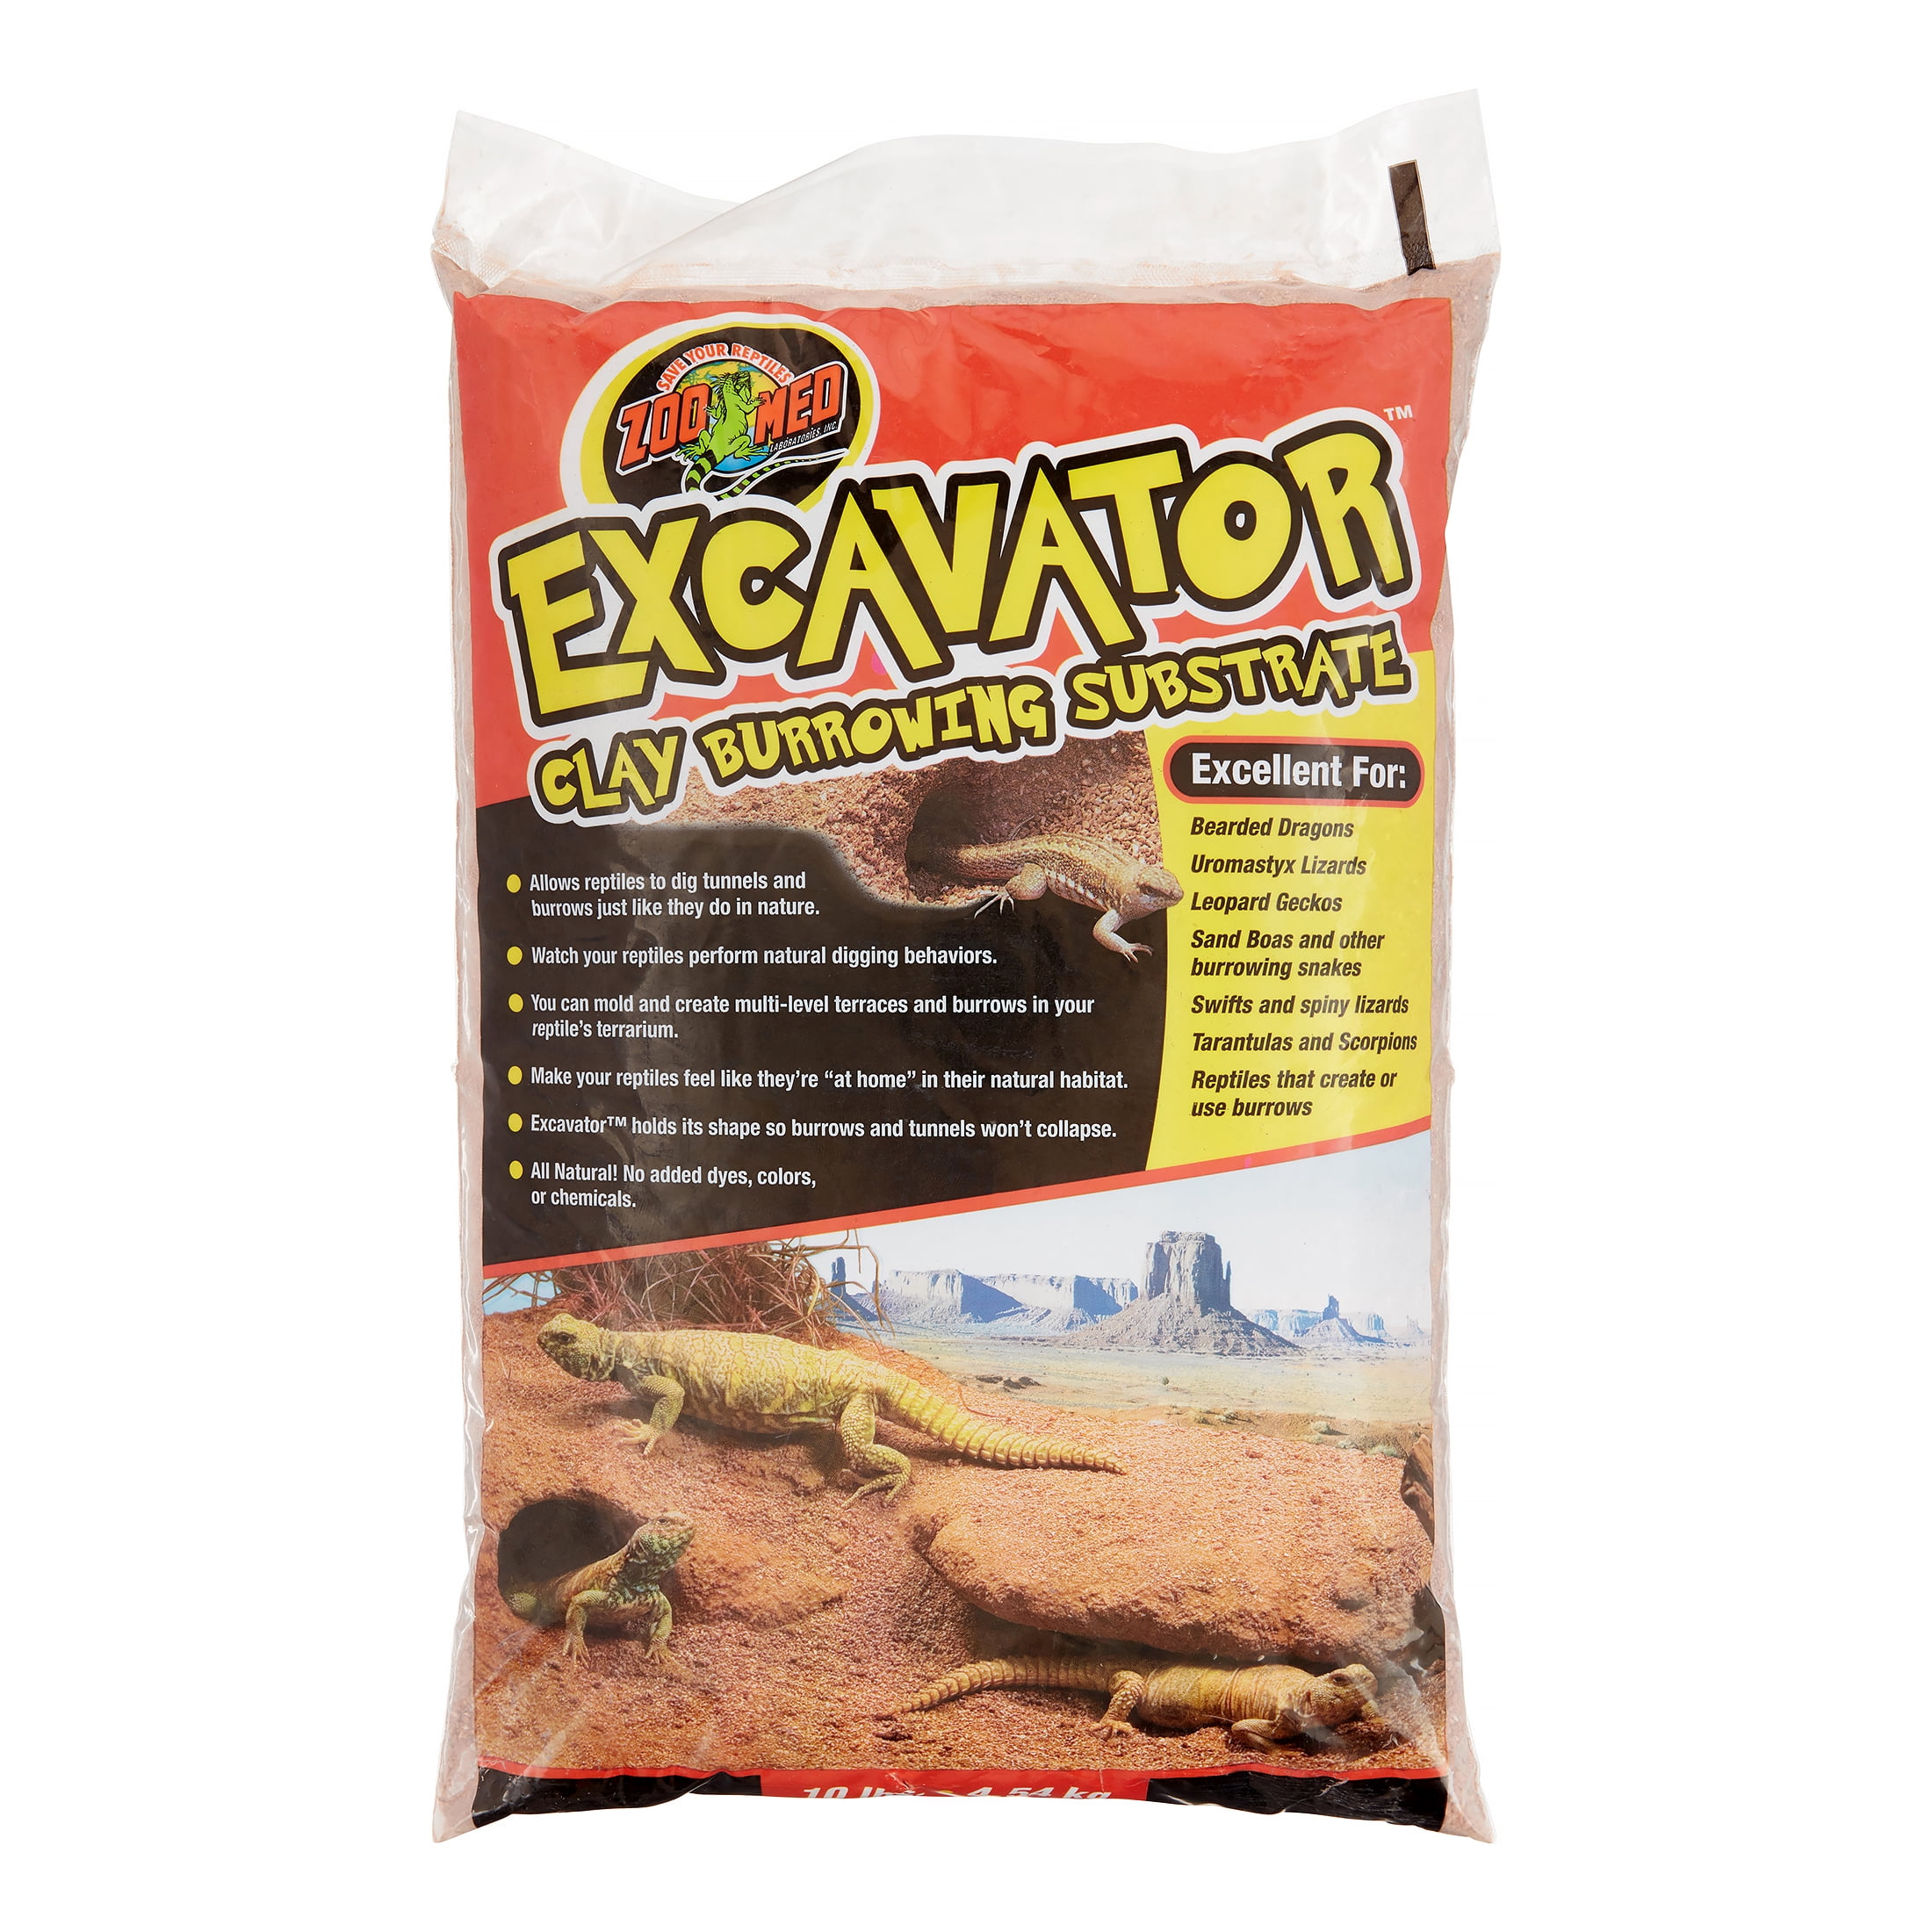 Zoo Med Excavator Clay Burrowing Substrate, 10 Lb